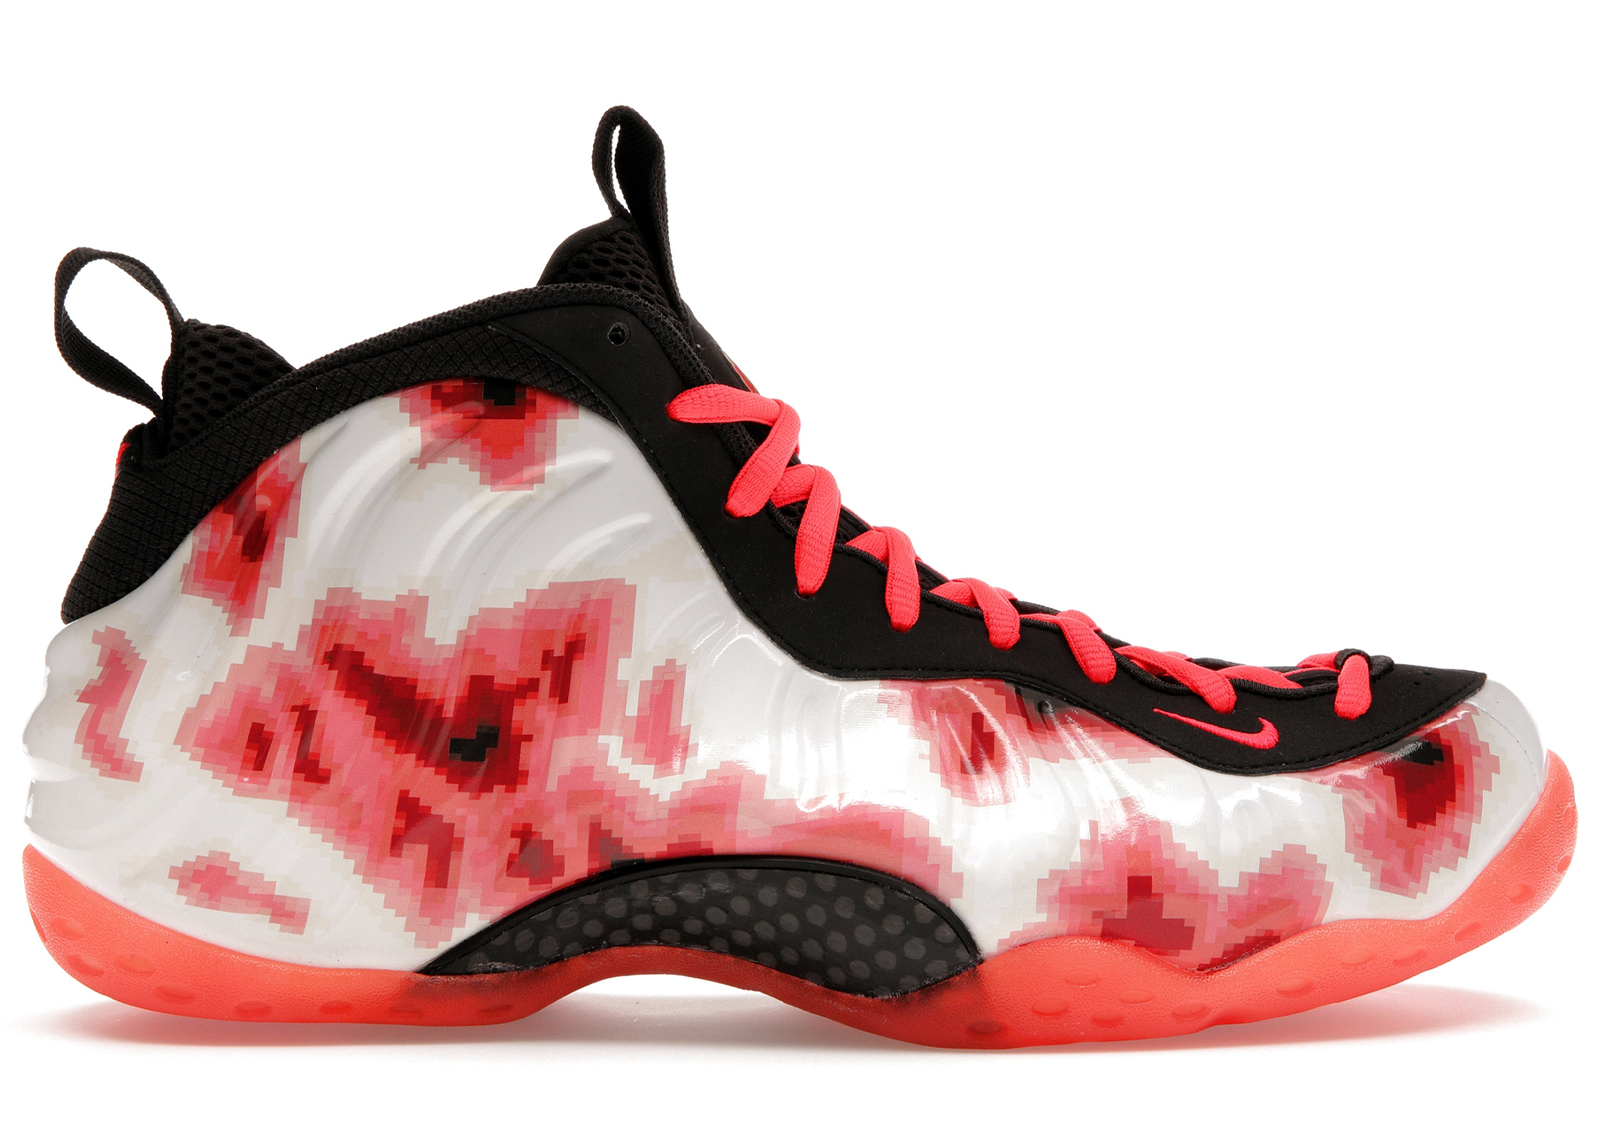 Nike Air Foamposite One Thermal Map